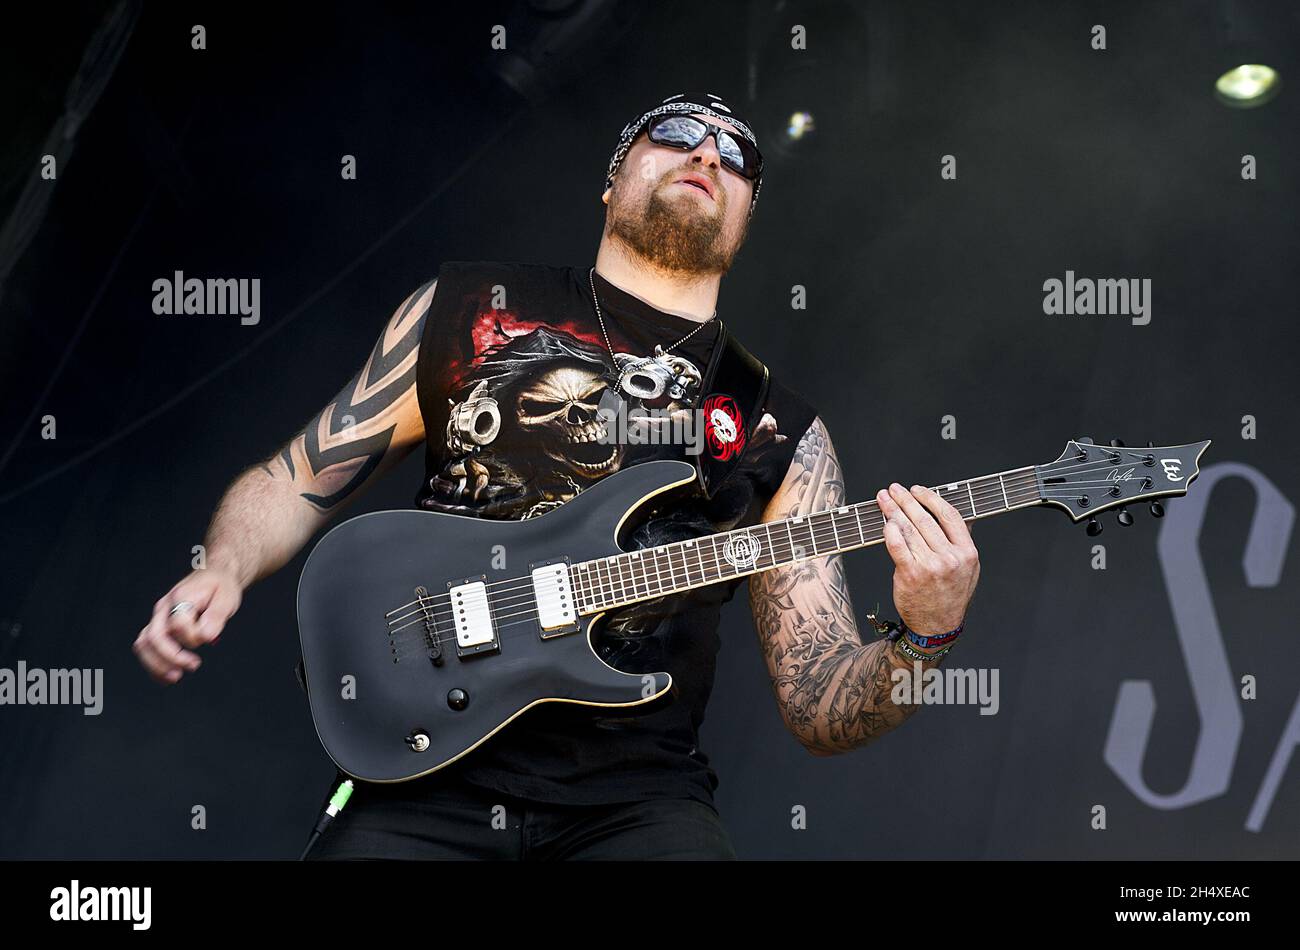 Craig Daws of Sacred Mother Tongue performs on stage on Day 3 at Bloodstock Open Air Festival 2013 at Catton Hall on August 11, 2013. Stock Photo